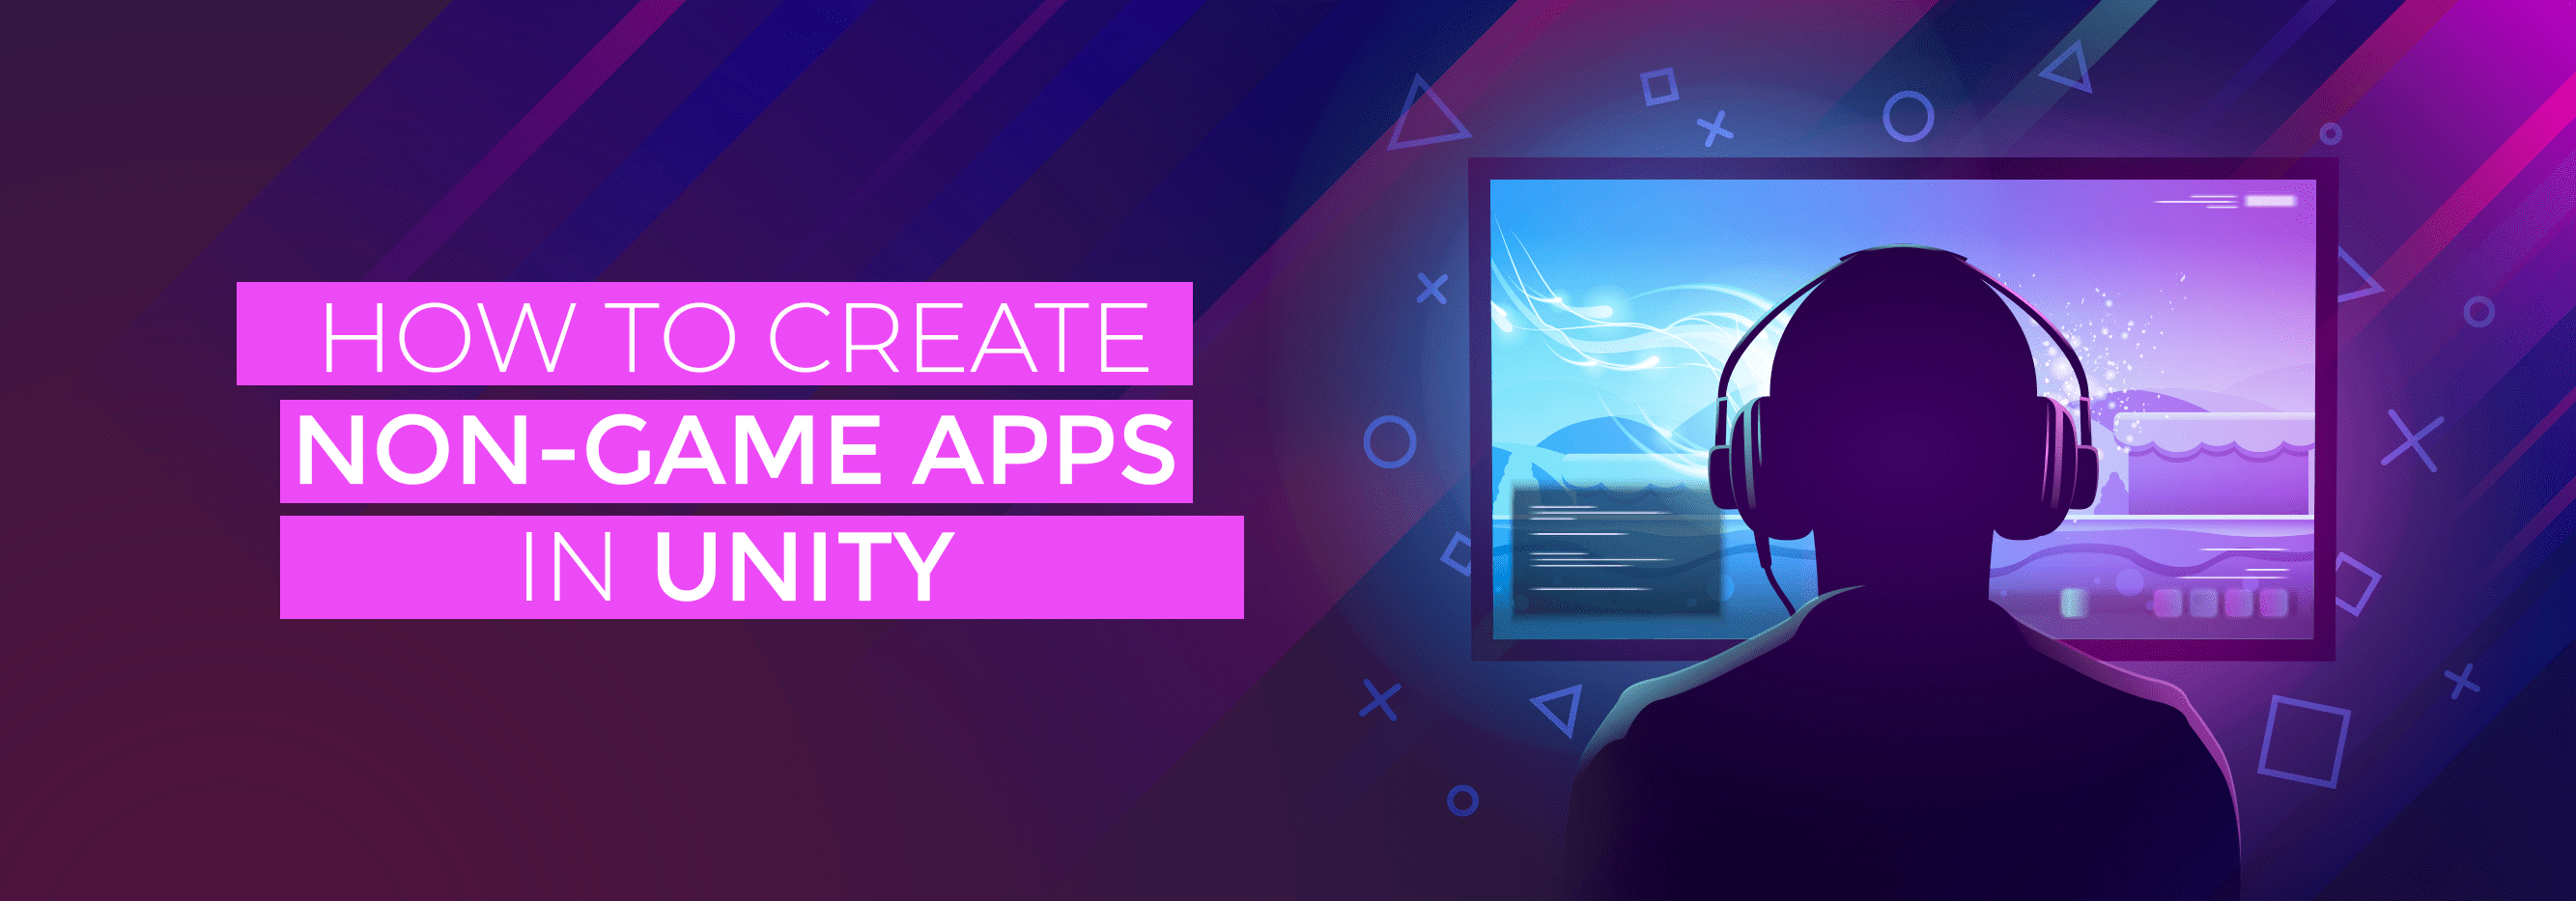 How to Create Non-game Apps in Unity_banner